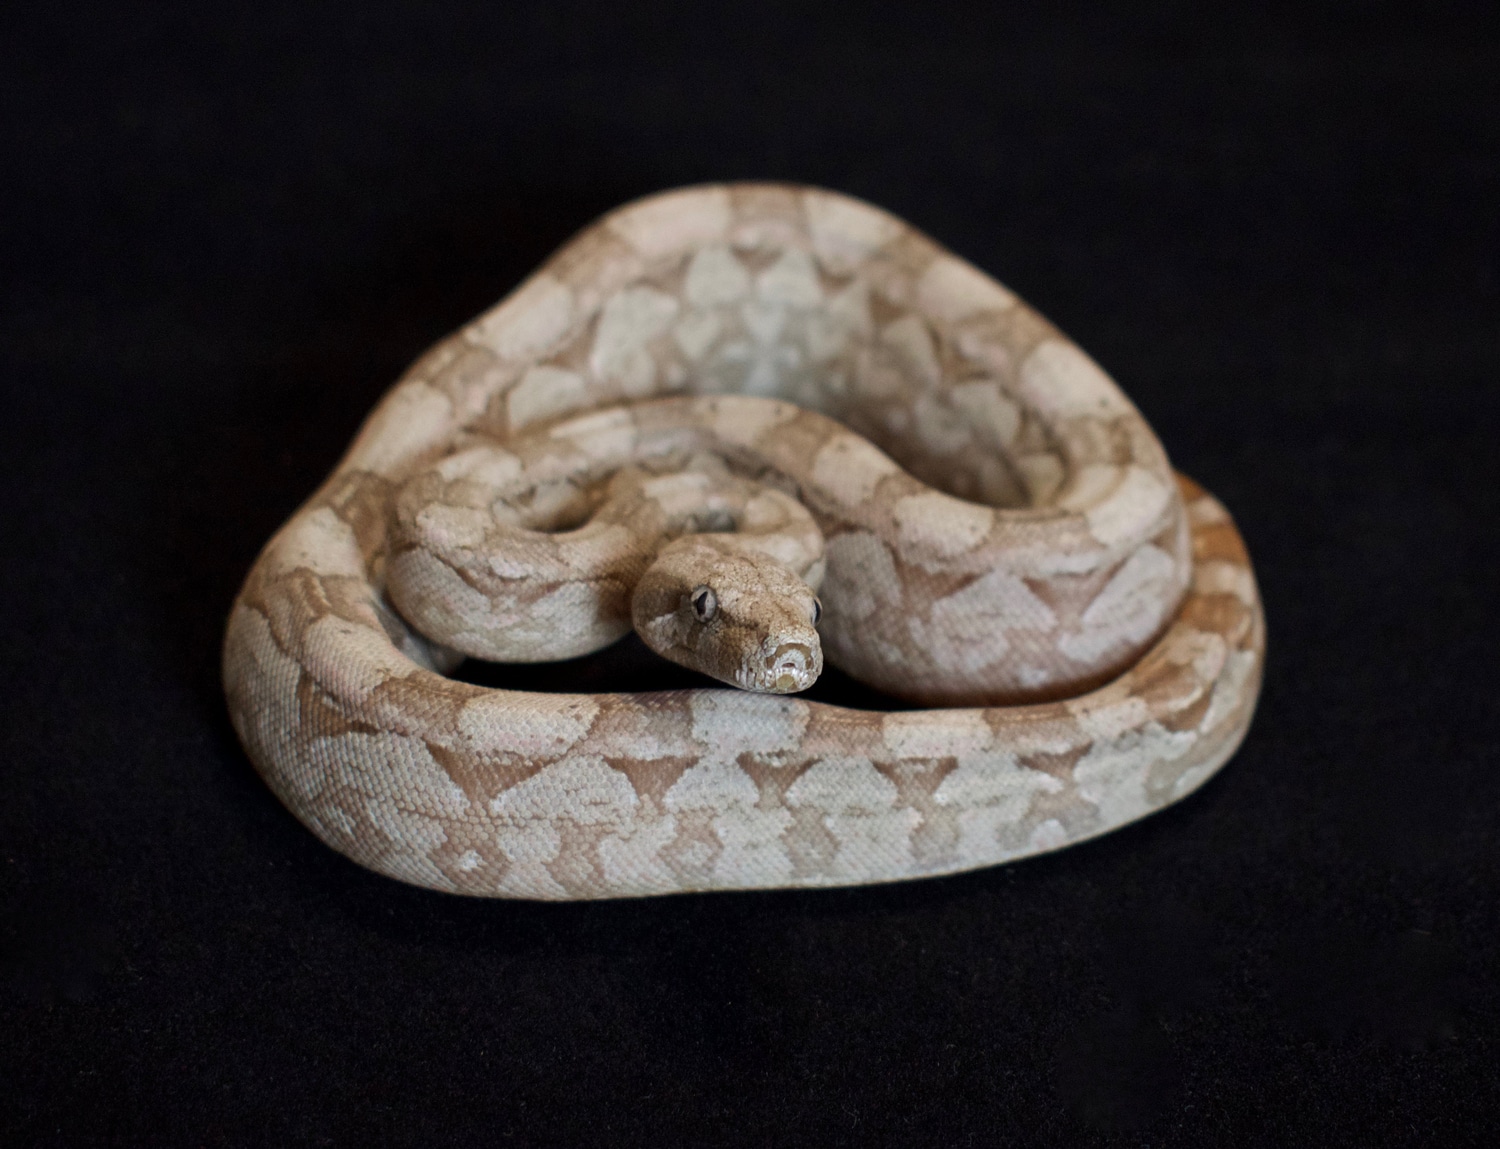 T+ Albino BCO Argentine Boa Constrictor by KL Constrictors